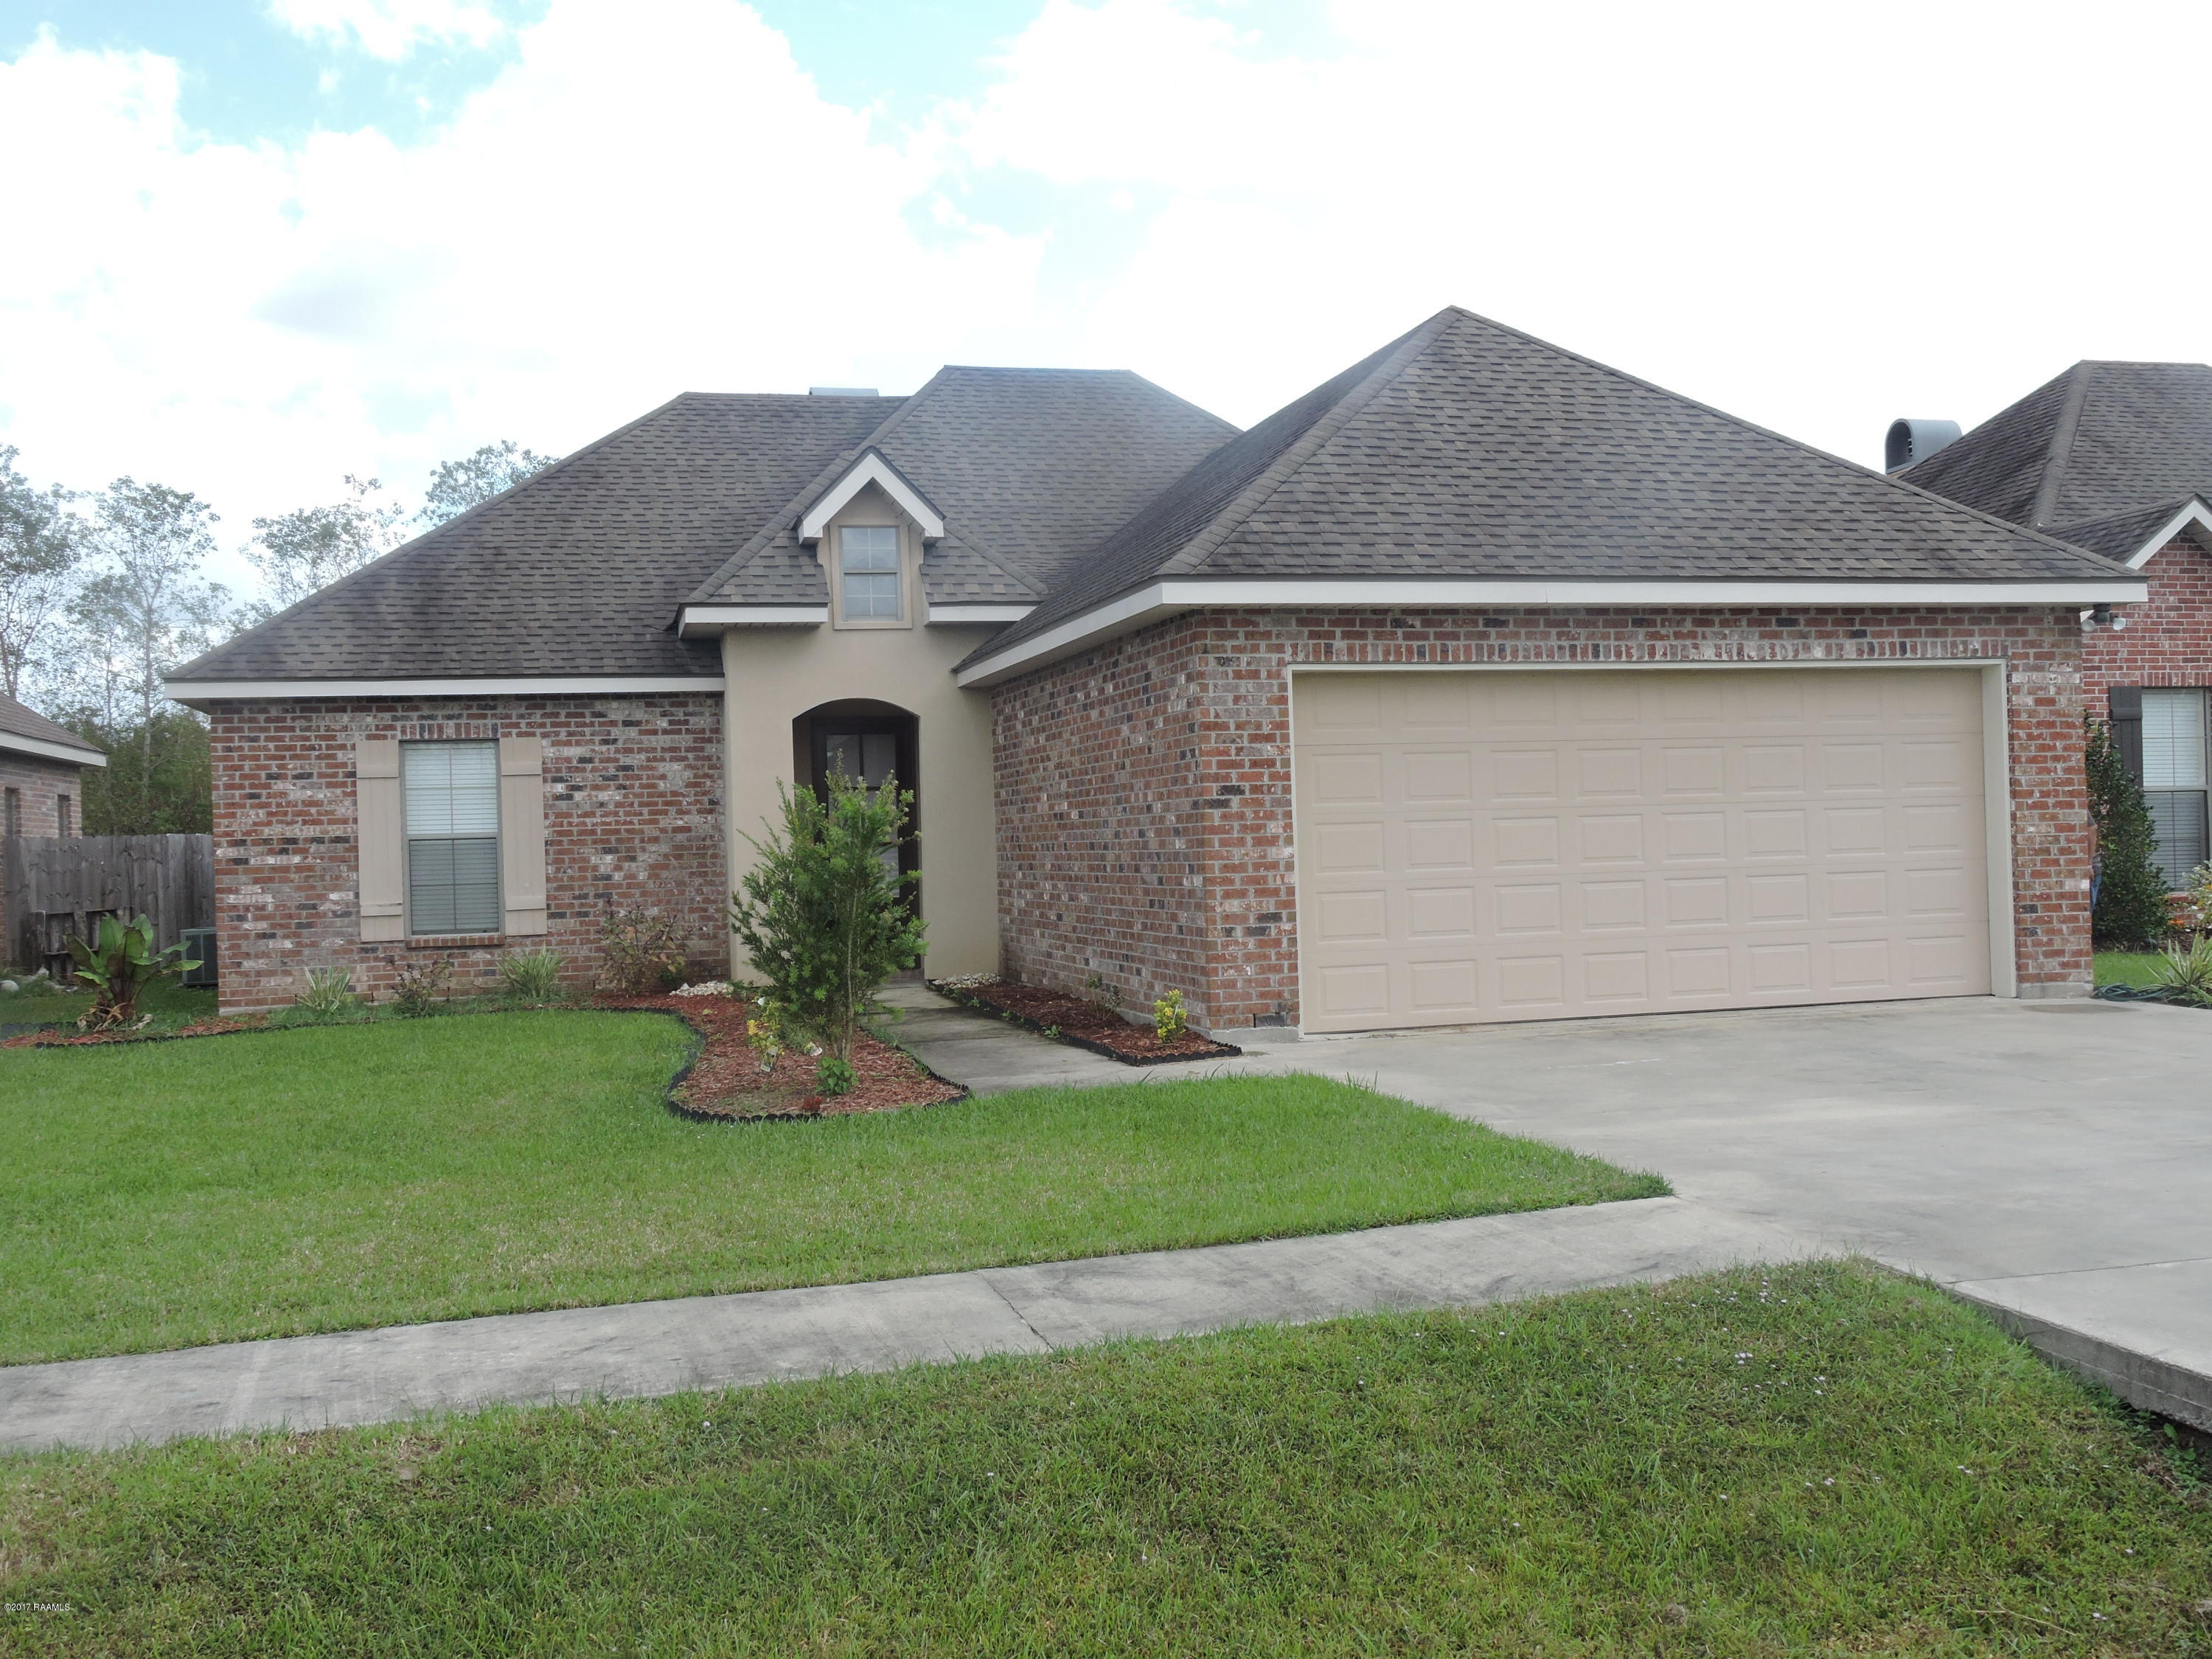 118 Zoie Lafayette Home Listings - Duncan Realty Professionals, LLC Lafayette Real Estate